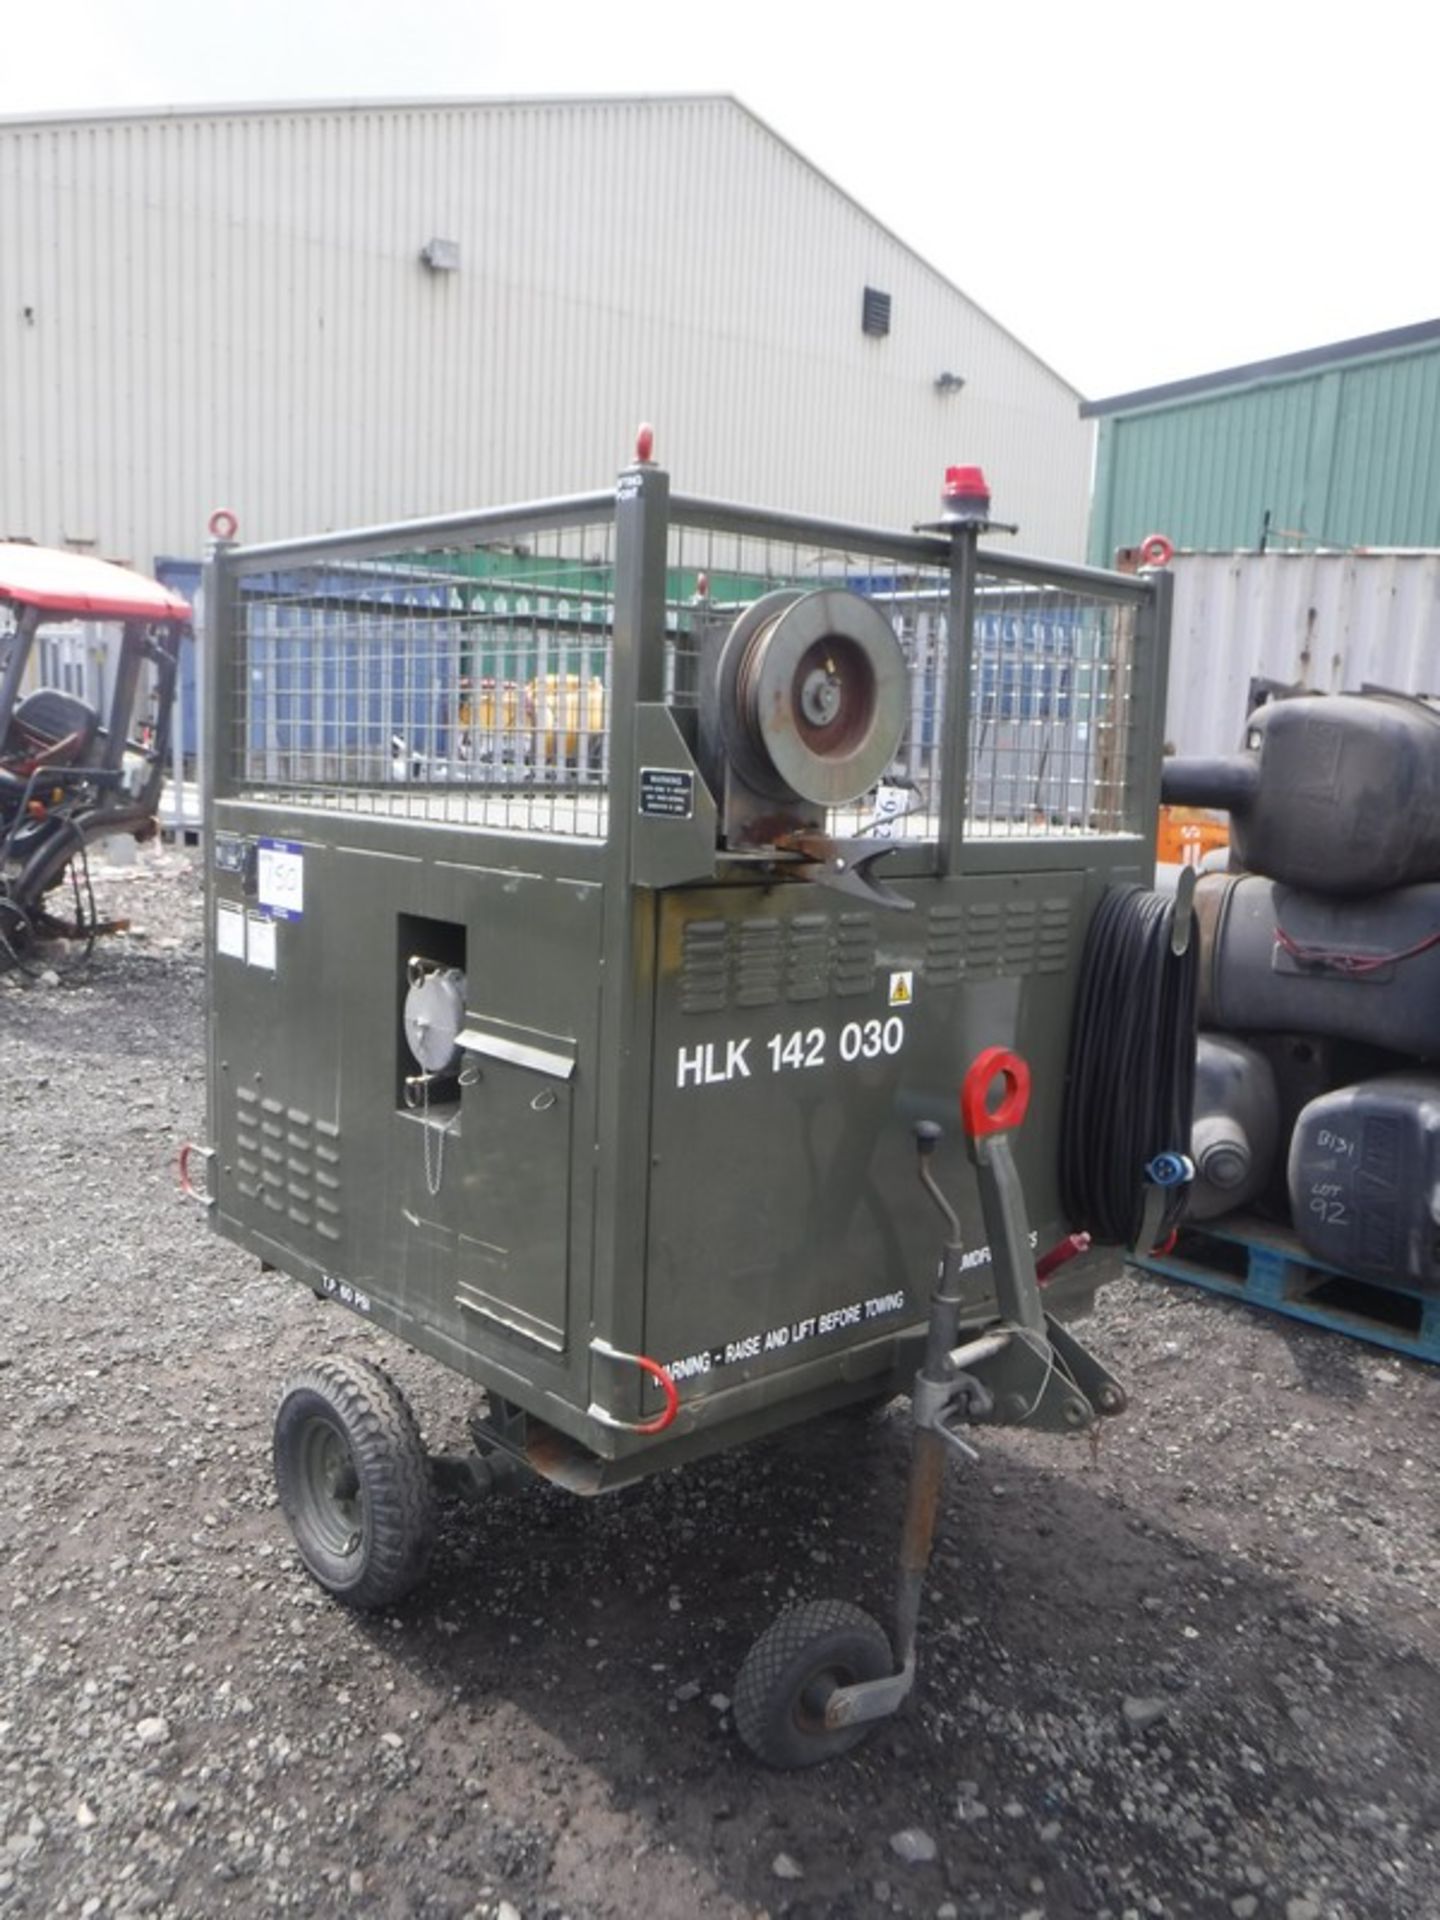 2000 DEHUMIDIFICATION trolley for small aircraft with Lister Petter diesel engine generator 1301hrs